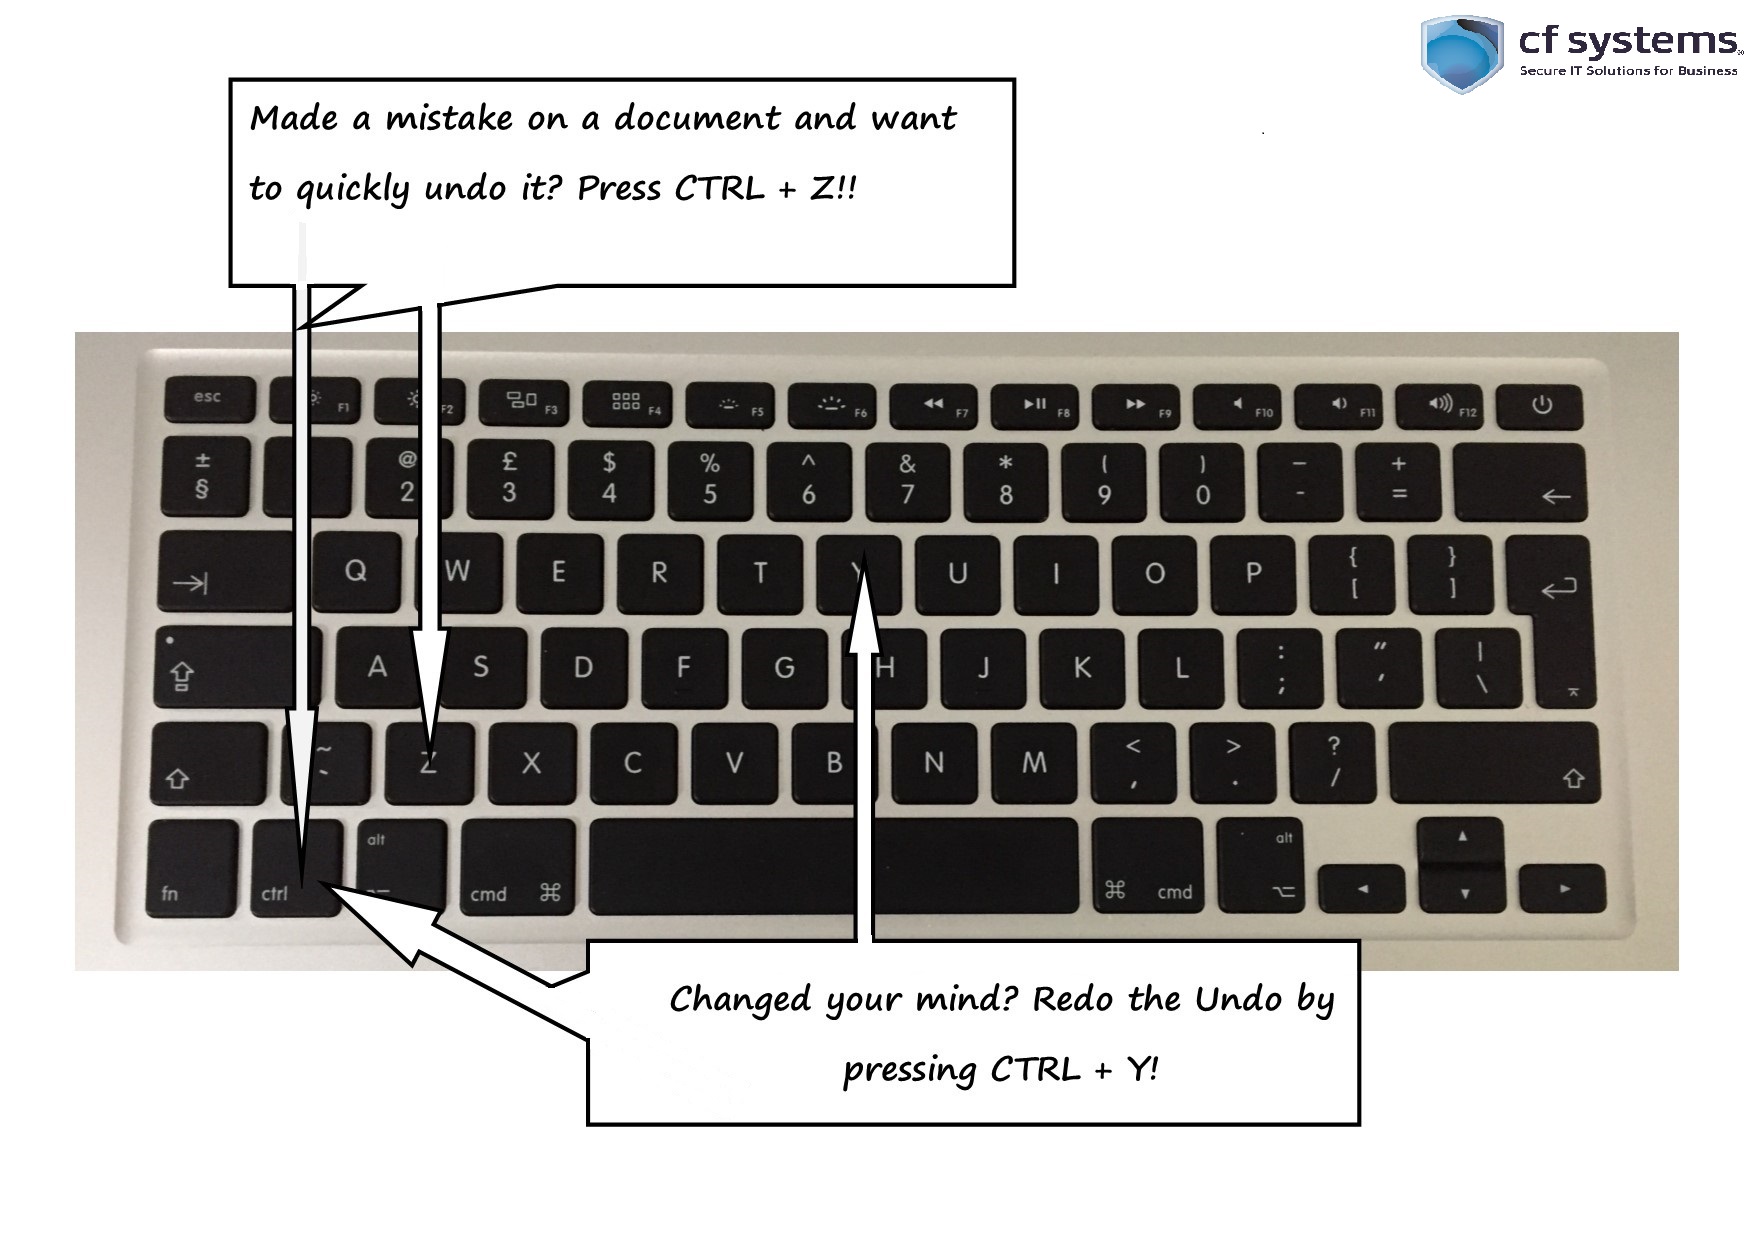 How to Redo on Keyboard?